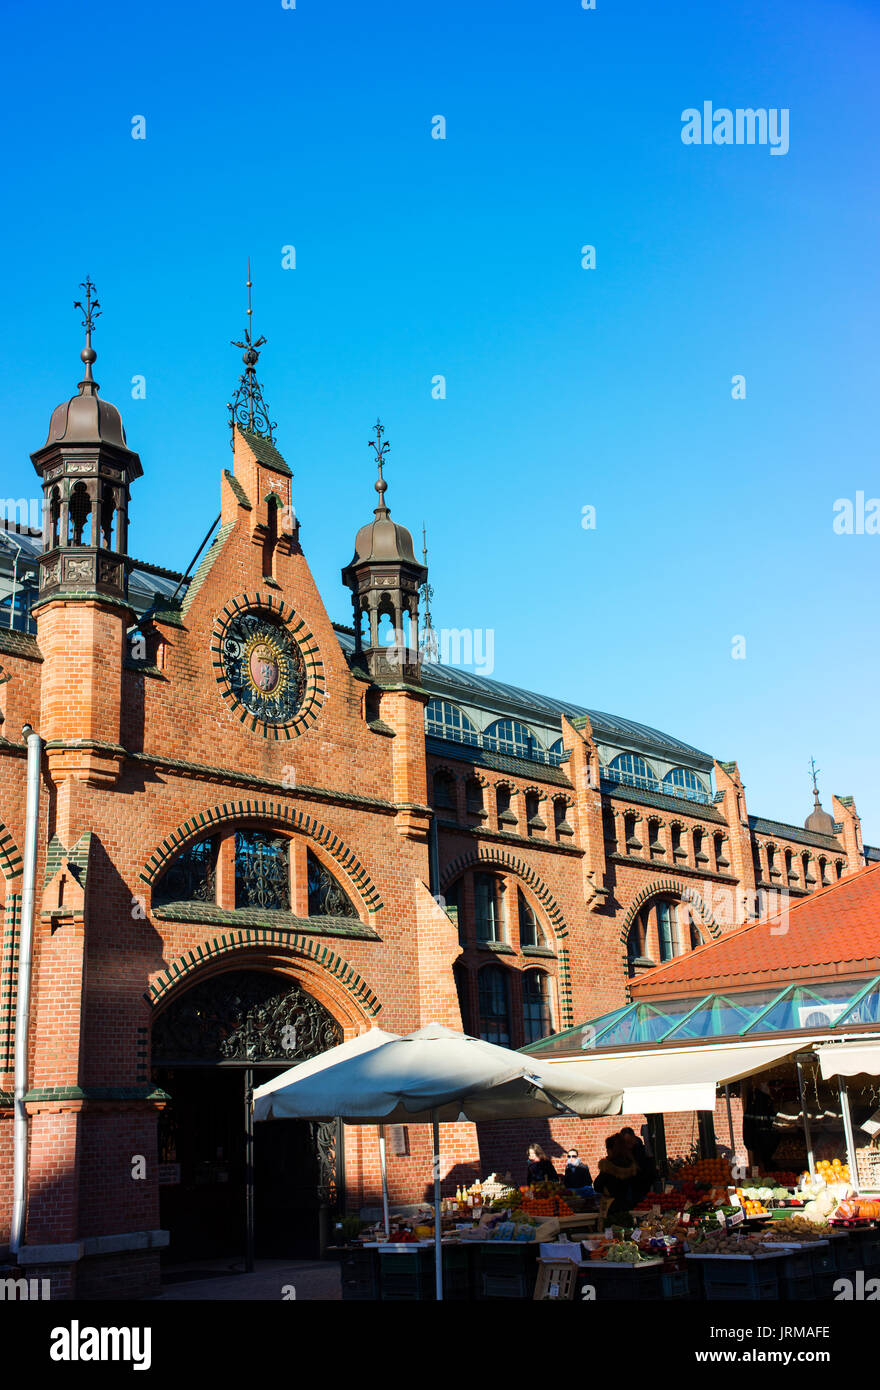 One of the entrances to Hala Targowa, Gdansk's Market Hall, which was built in the late 19th century. Stock Photo